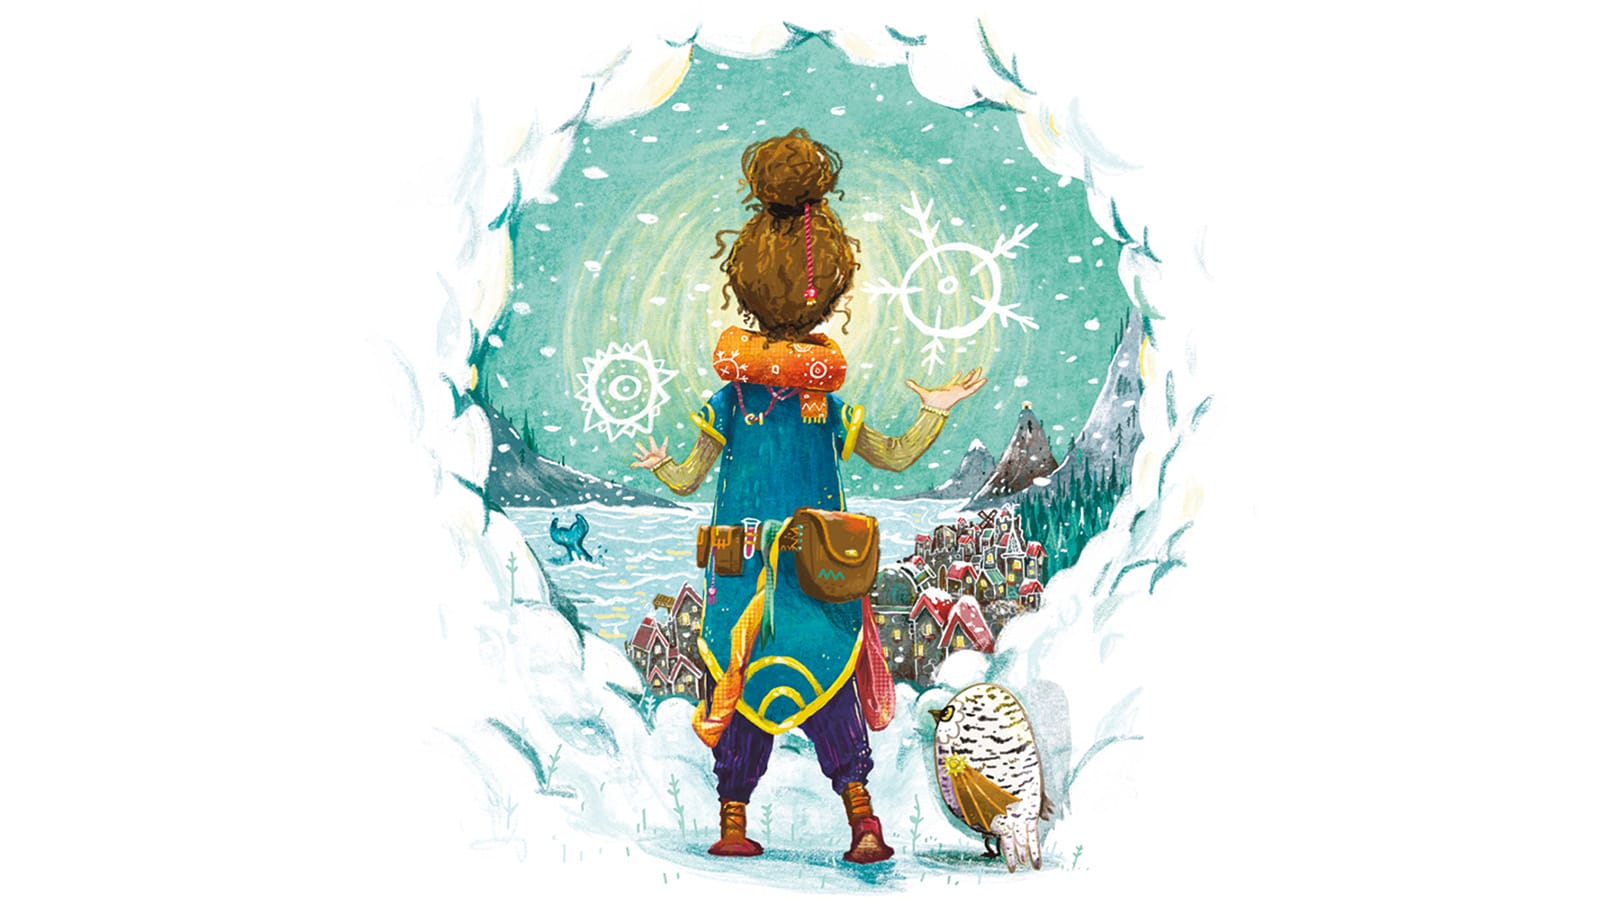 An illustration of a girl and an owl casting spells to make snow